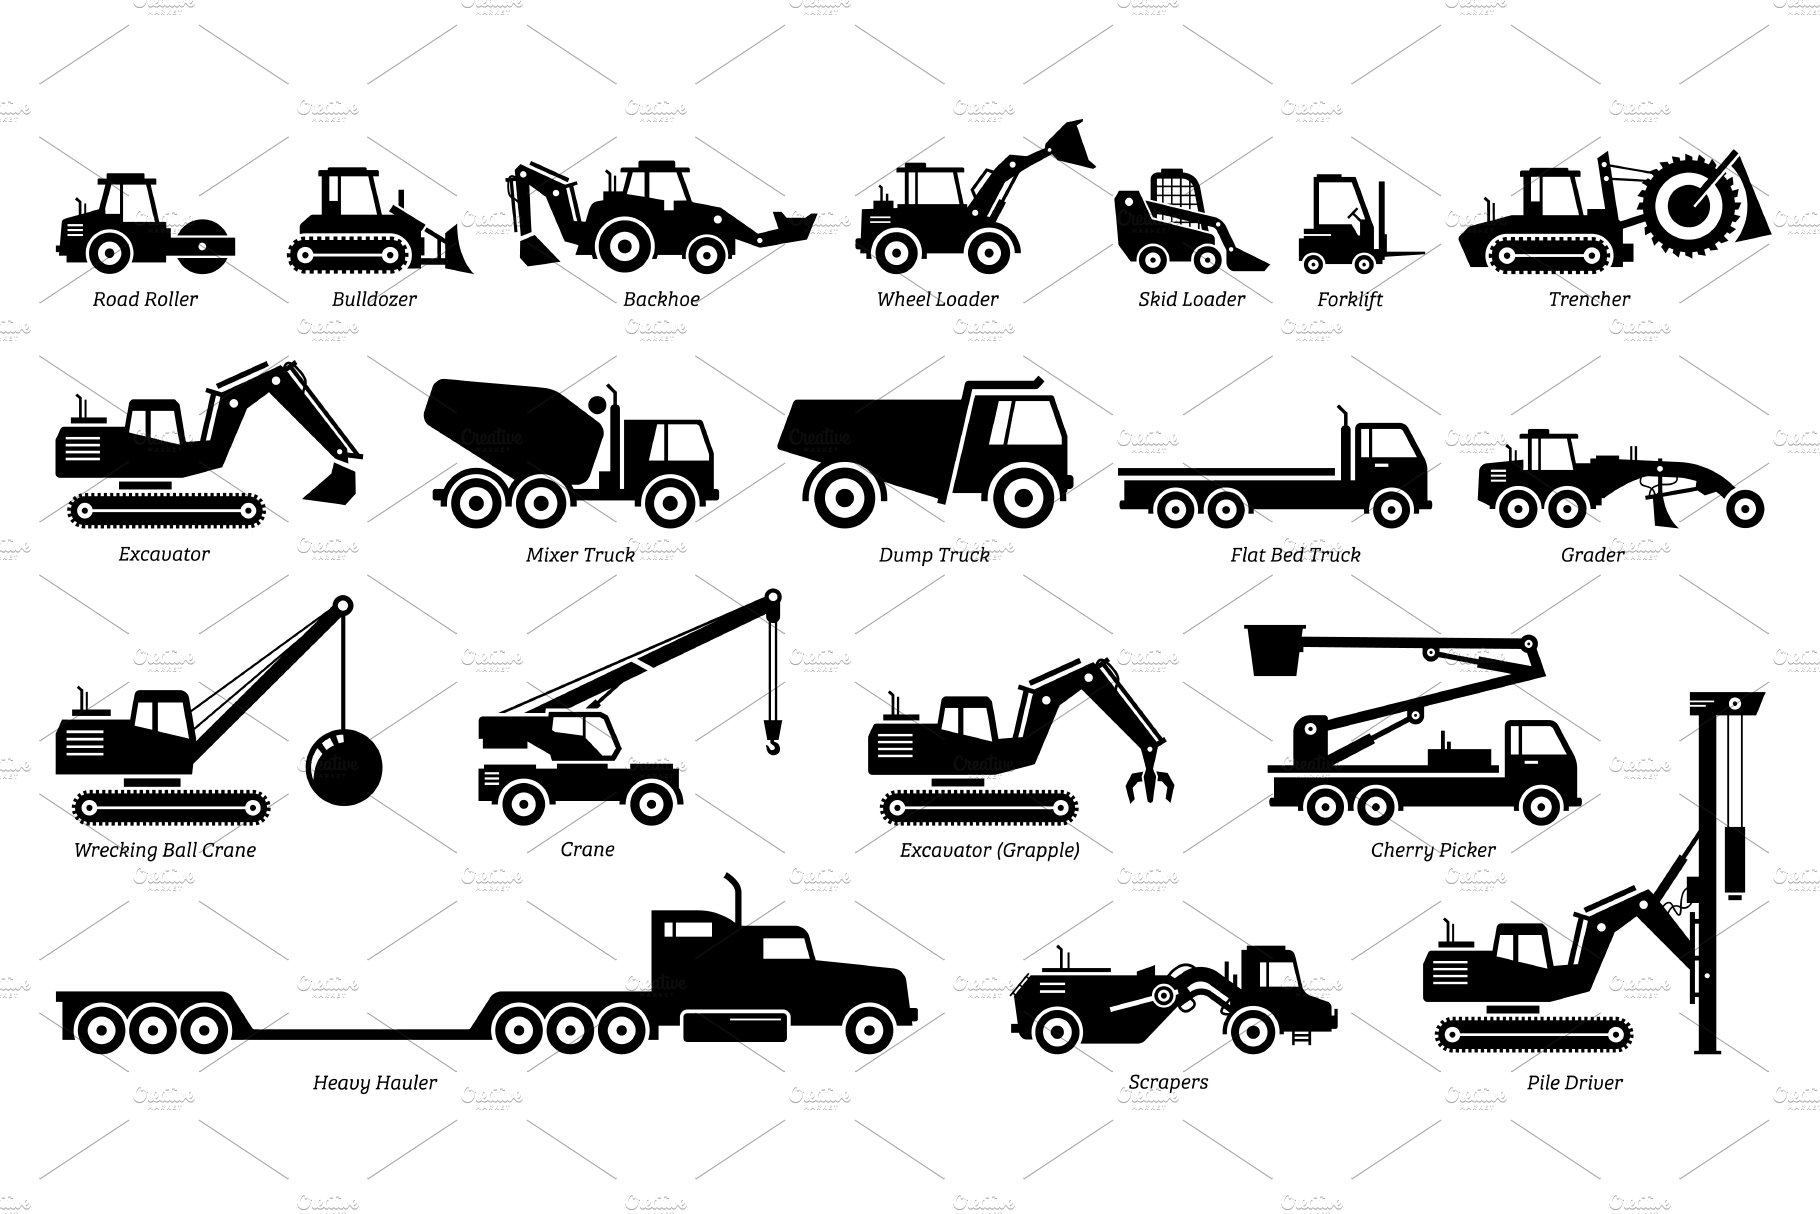 Construction Vehicles Types Icons cover image.